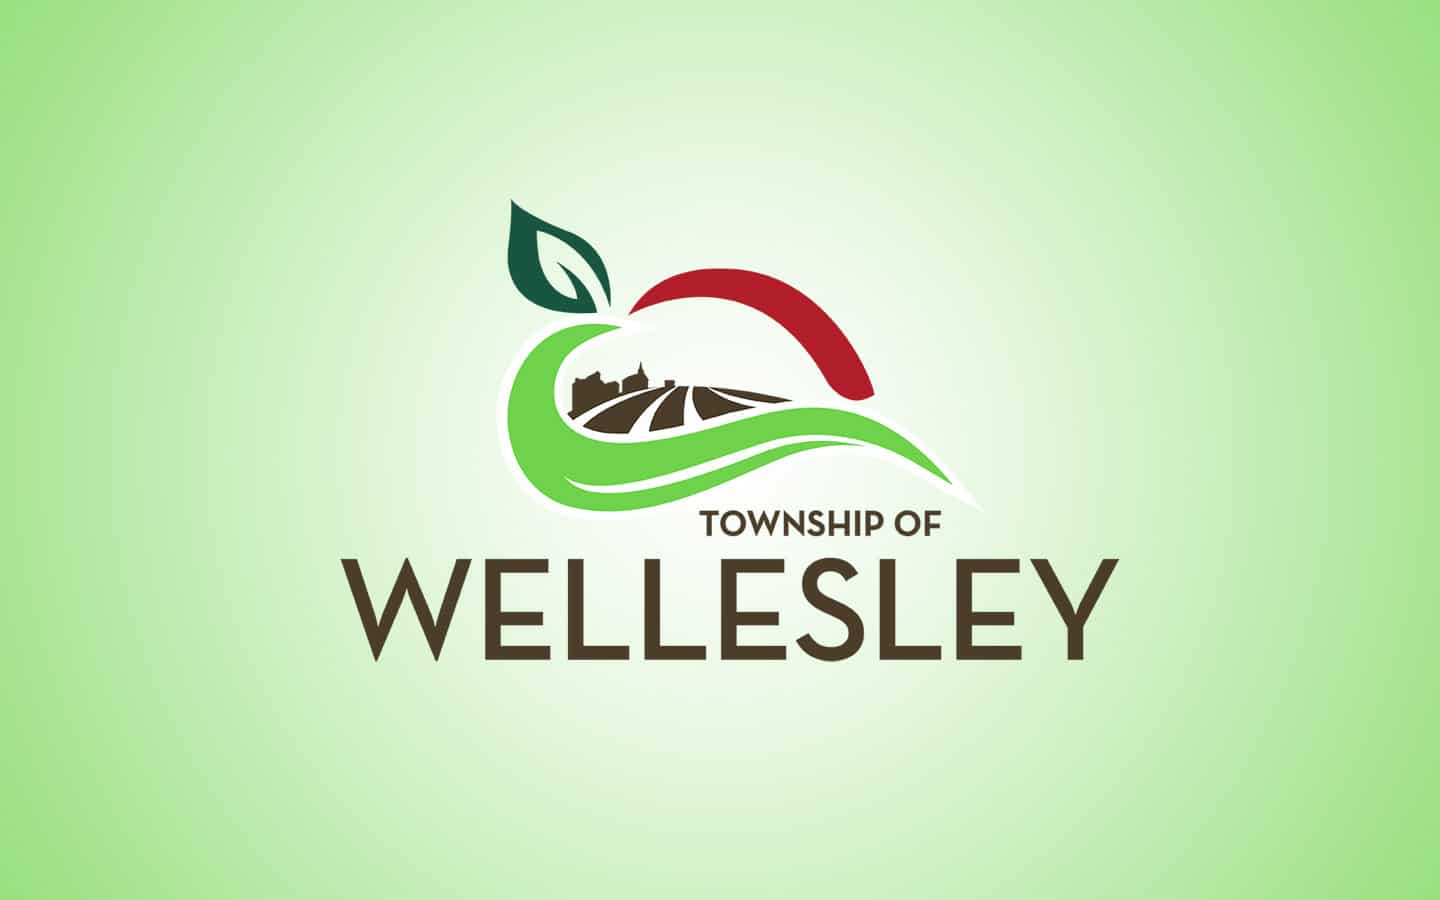 Wellesley church seeks room to grow; impact on farms a concern raised by neighbours